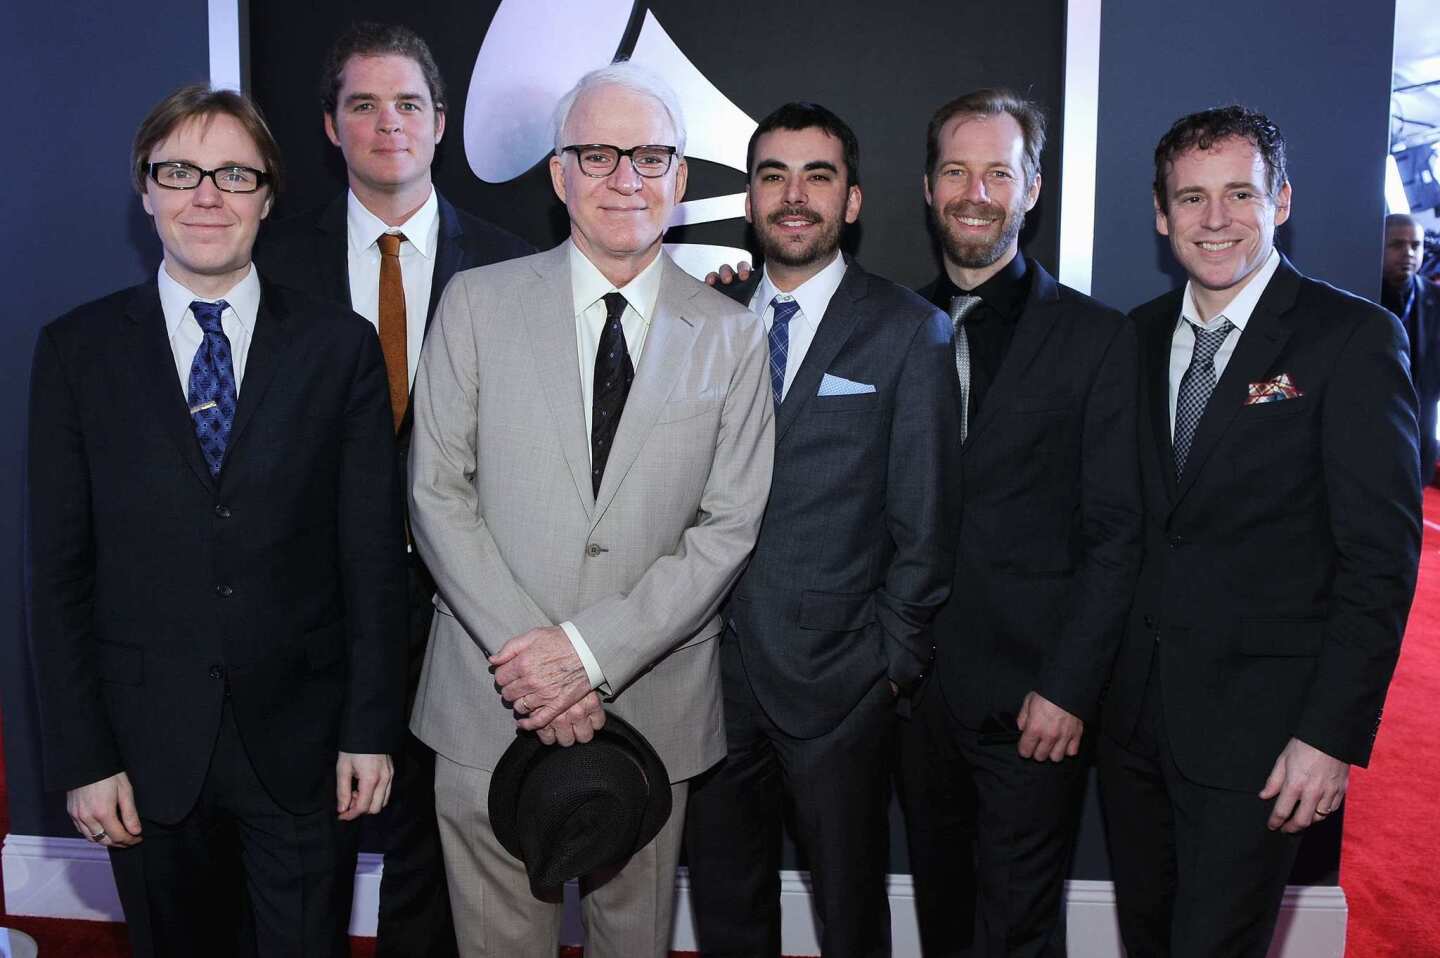 Mike Guggino, Woody Platt, Steve Martin, Nicky Sanders, Graham Sharp and Charles Humprey III of Steve Martin and the Steep Canyon Rangers are nominees in the bluegrass album category.